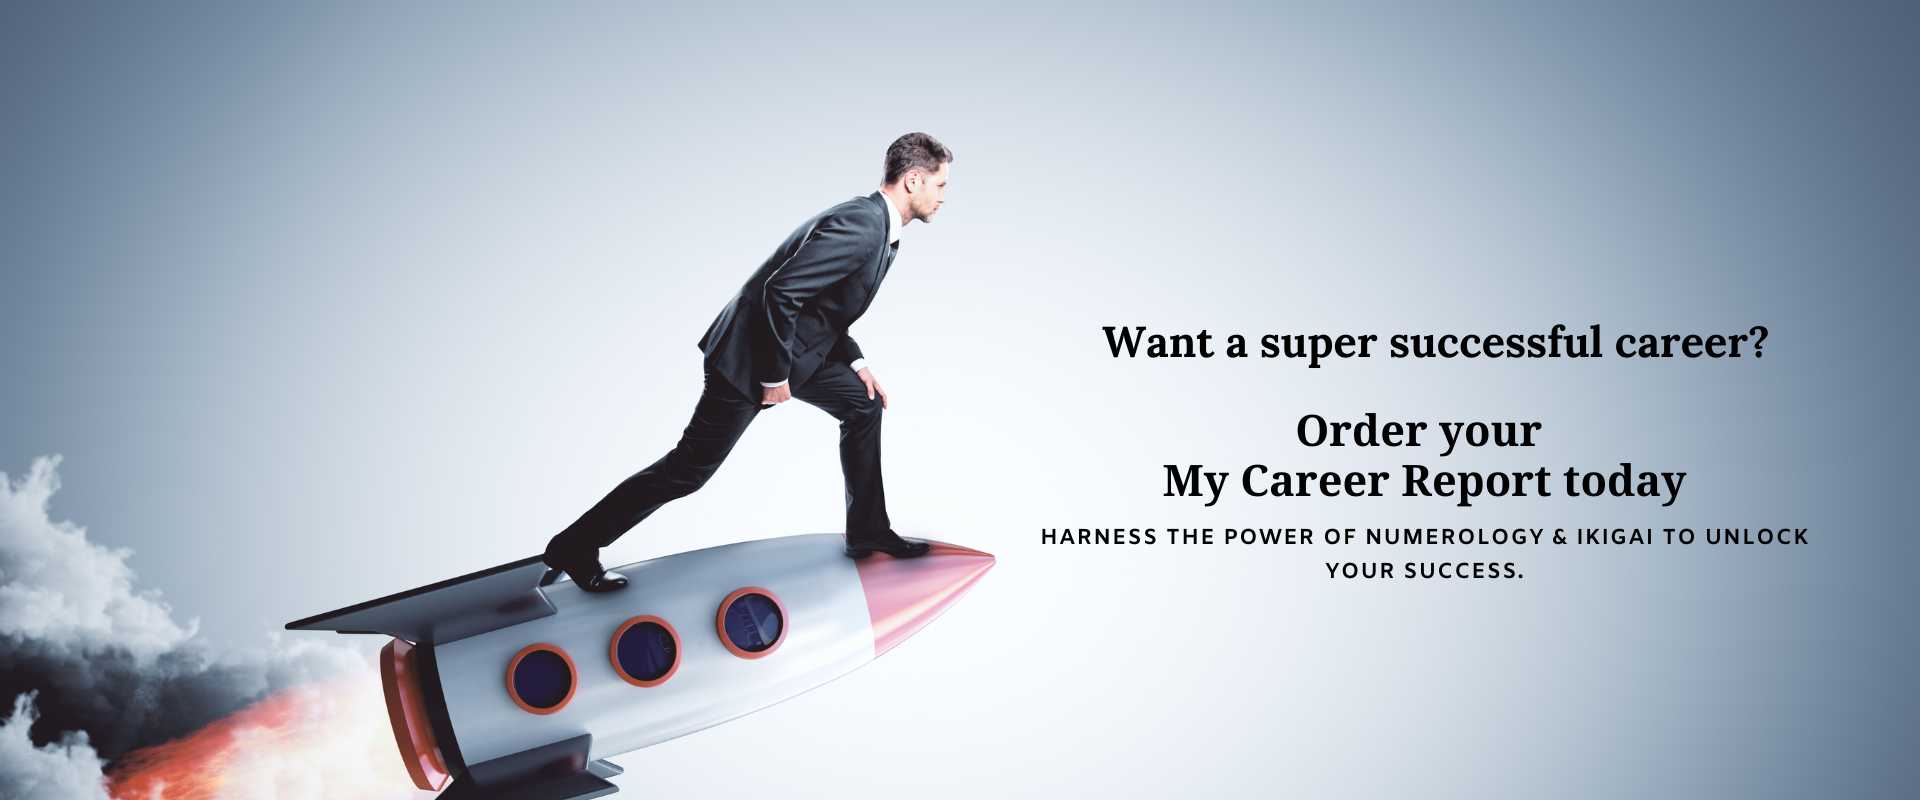 Launch a successful career with My Career Report